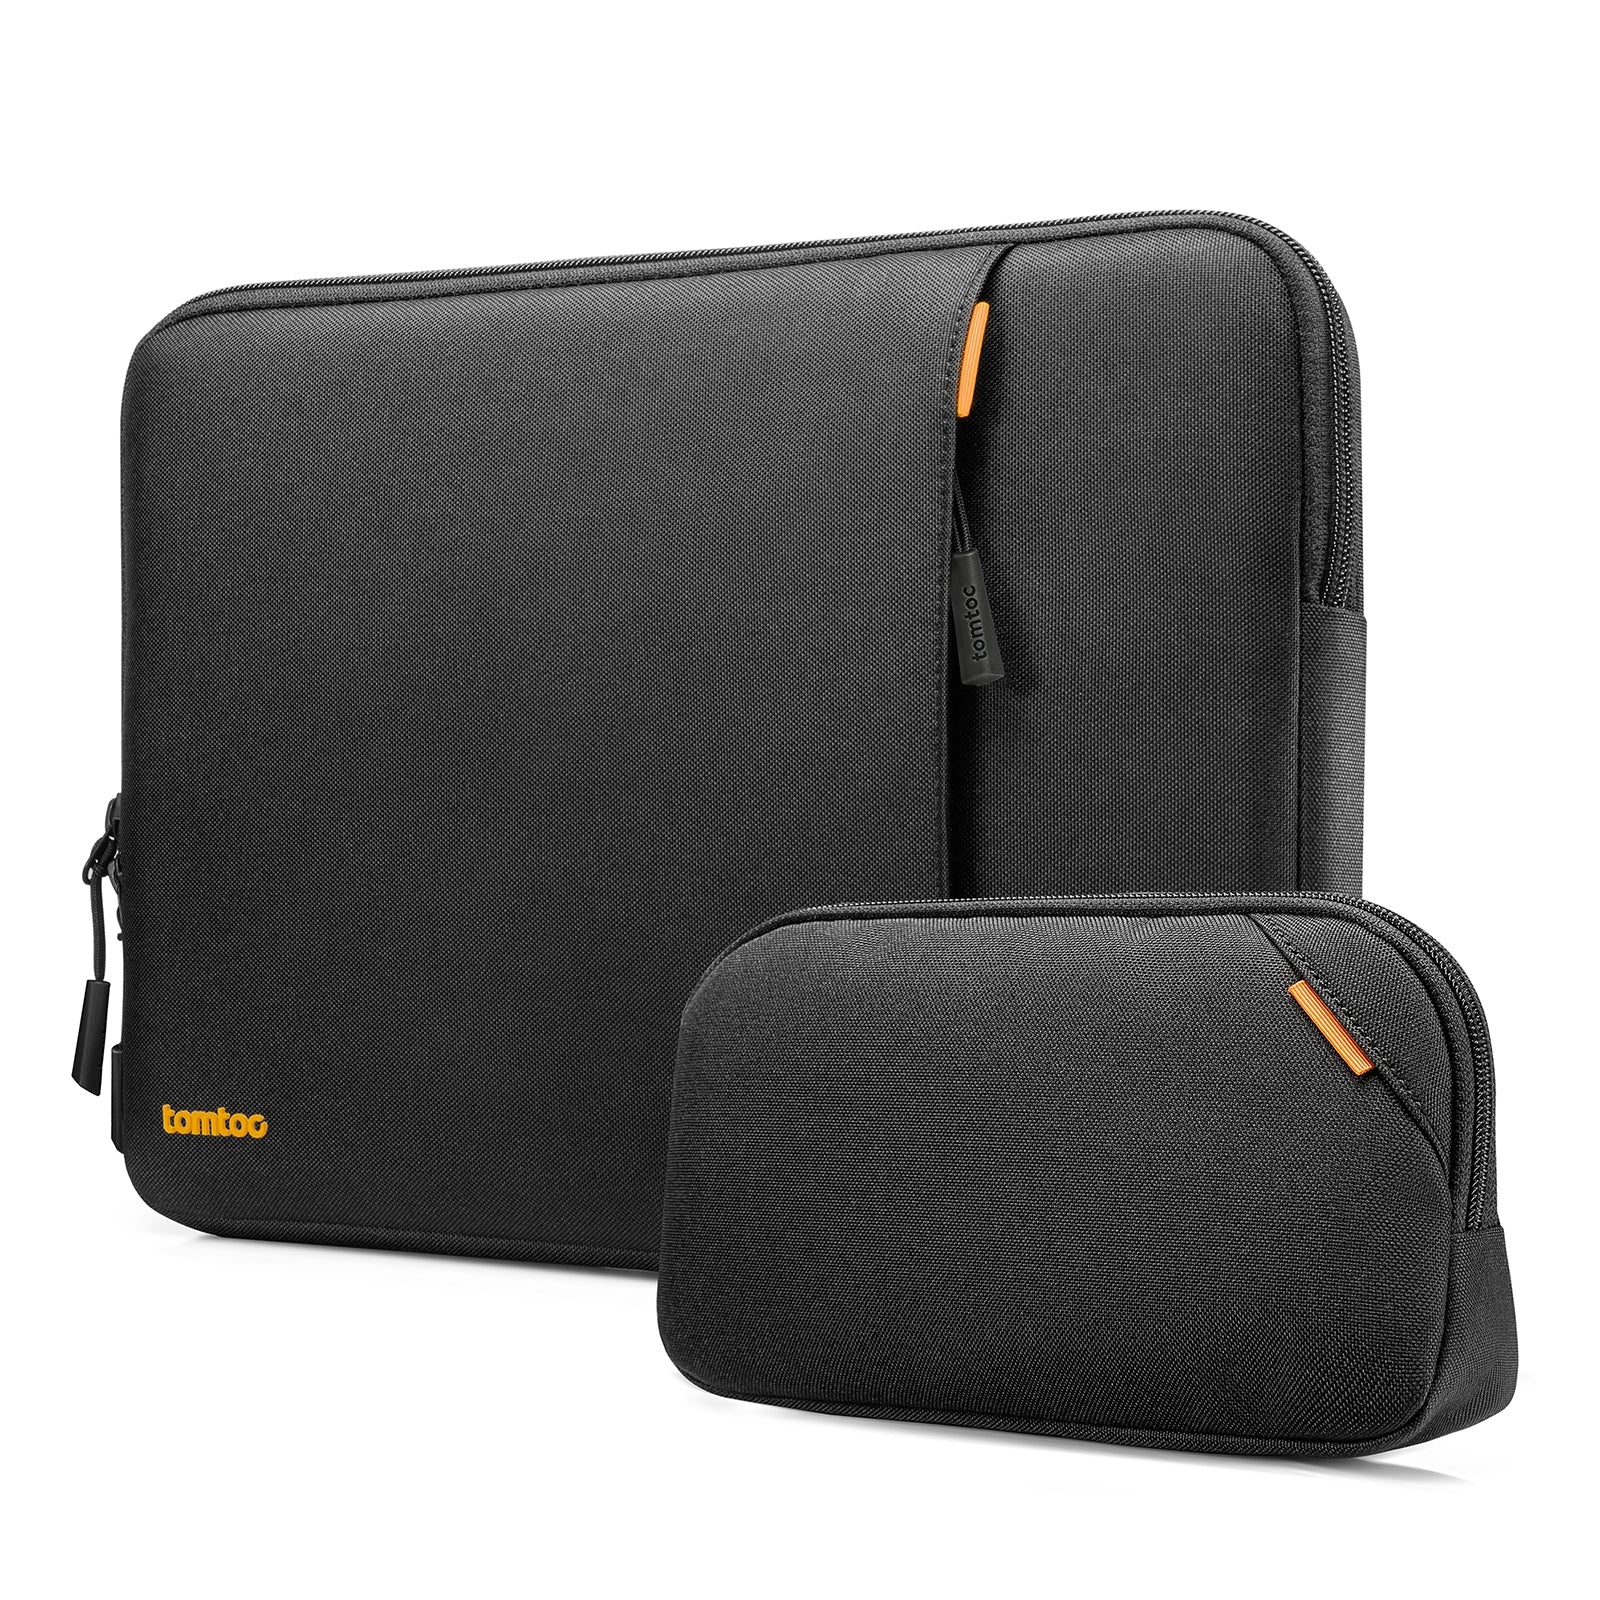 tomtoc 13 Inch Versatile 360 Protective Laptop Sleeve with Pouch - Black